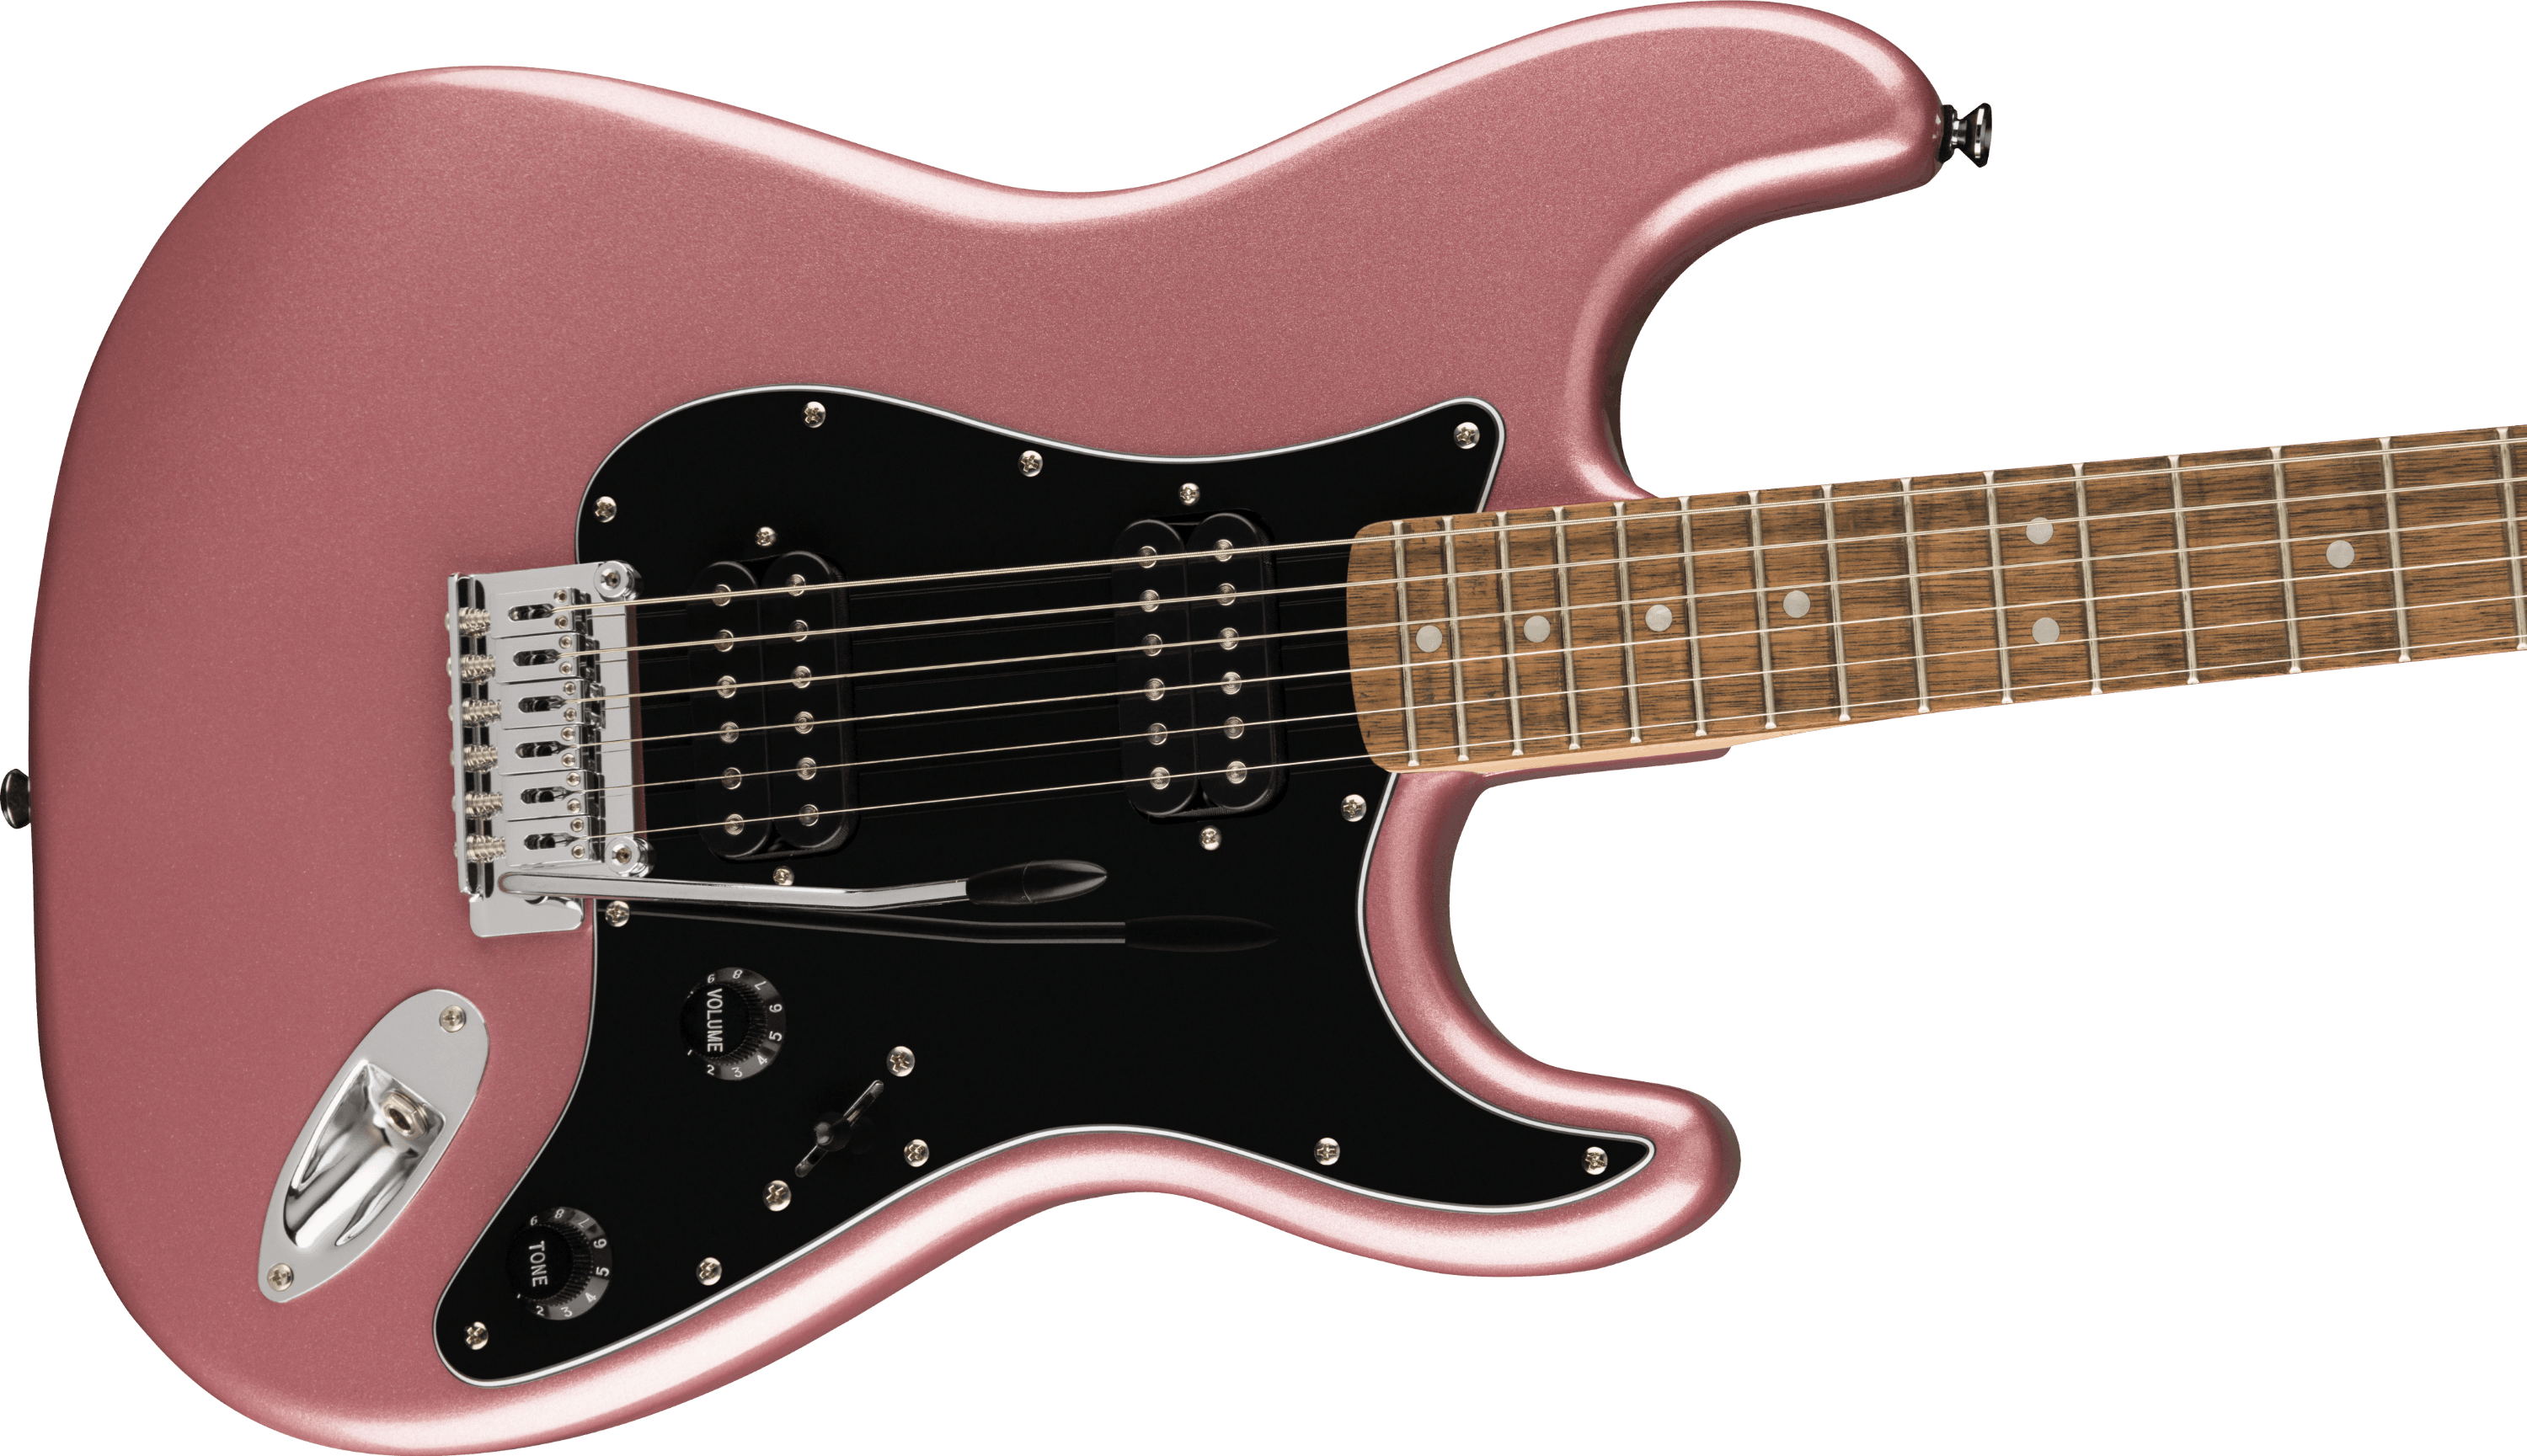 Squier Affinity Stratocaster HH Electric Guitar in Burgundy Mist